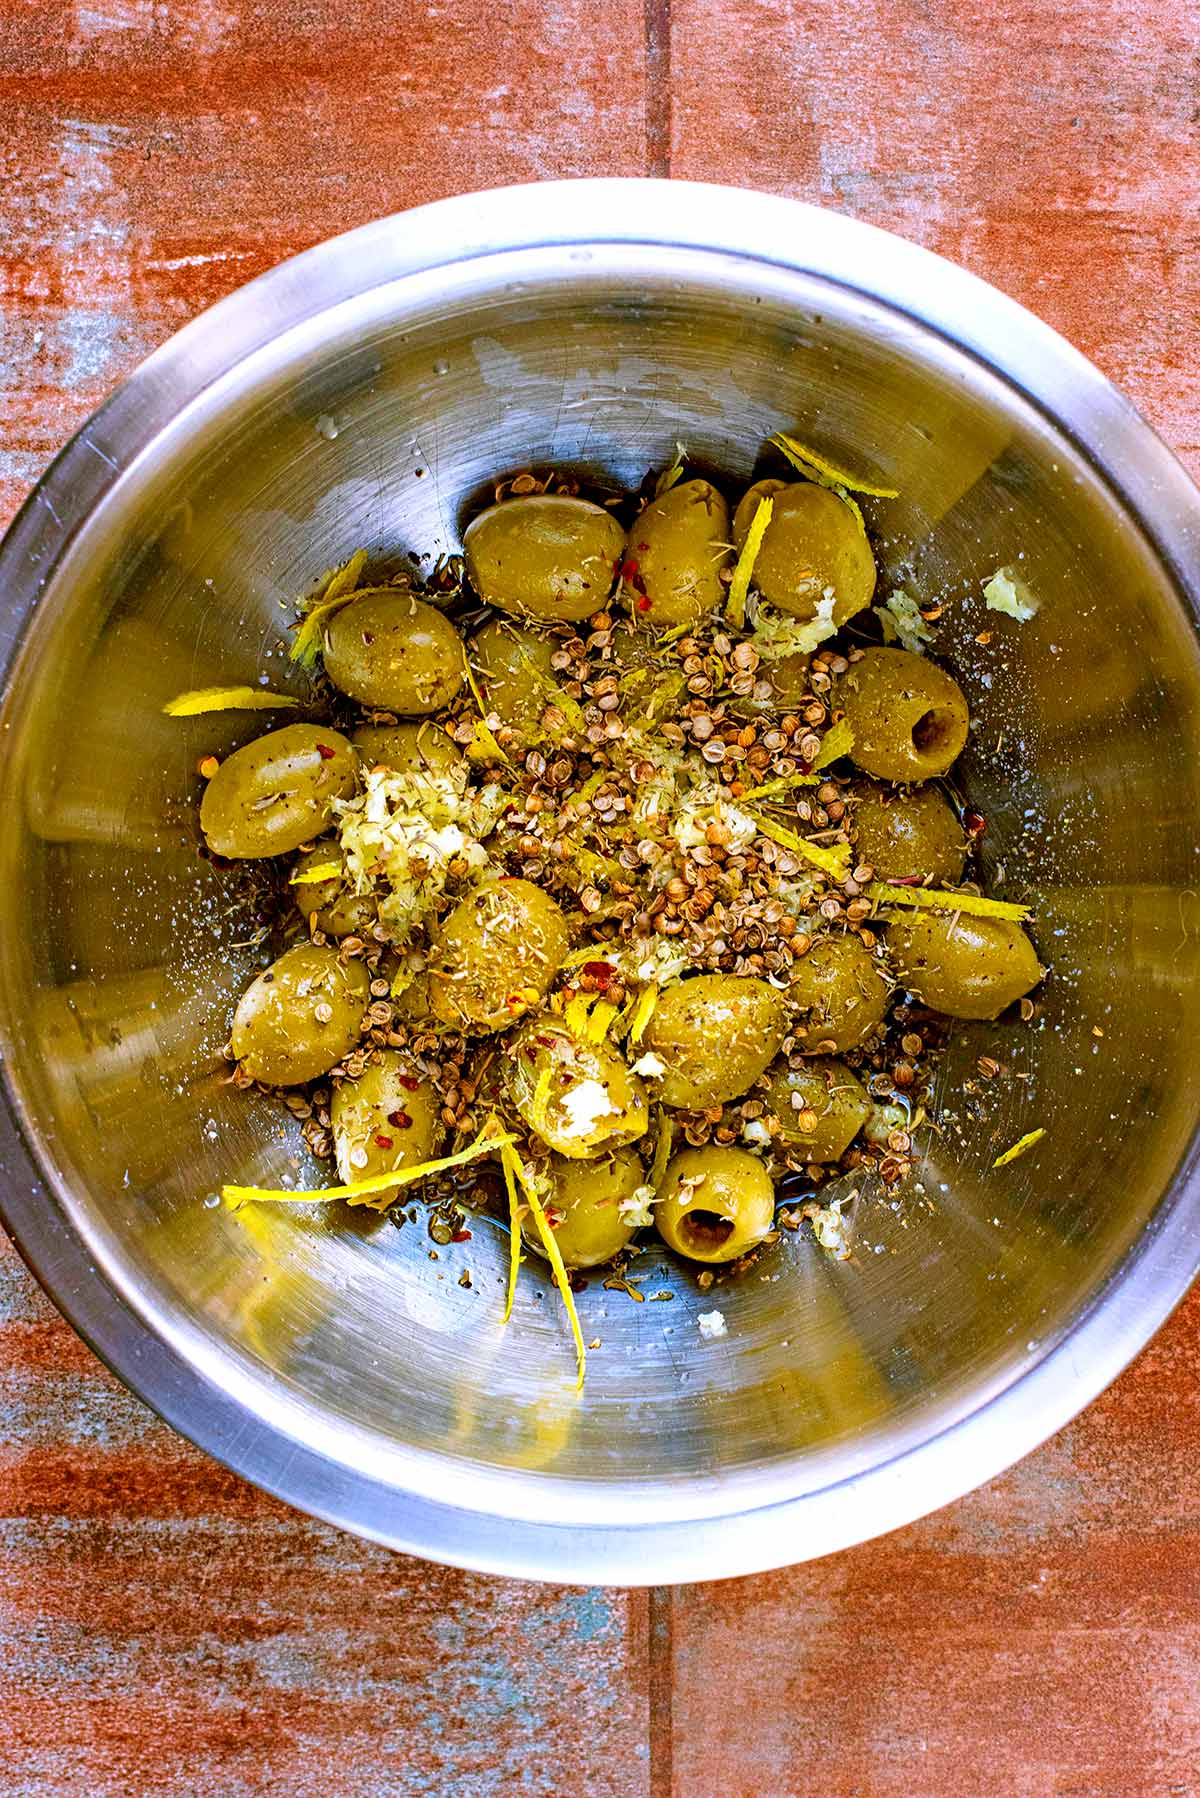 A metal bowl containing green olives marinated in oil, herbs and lemon zest.